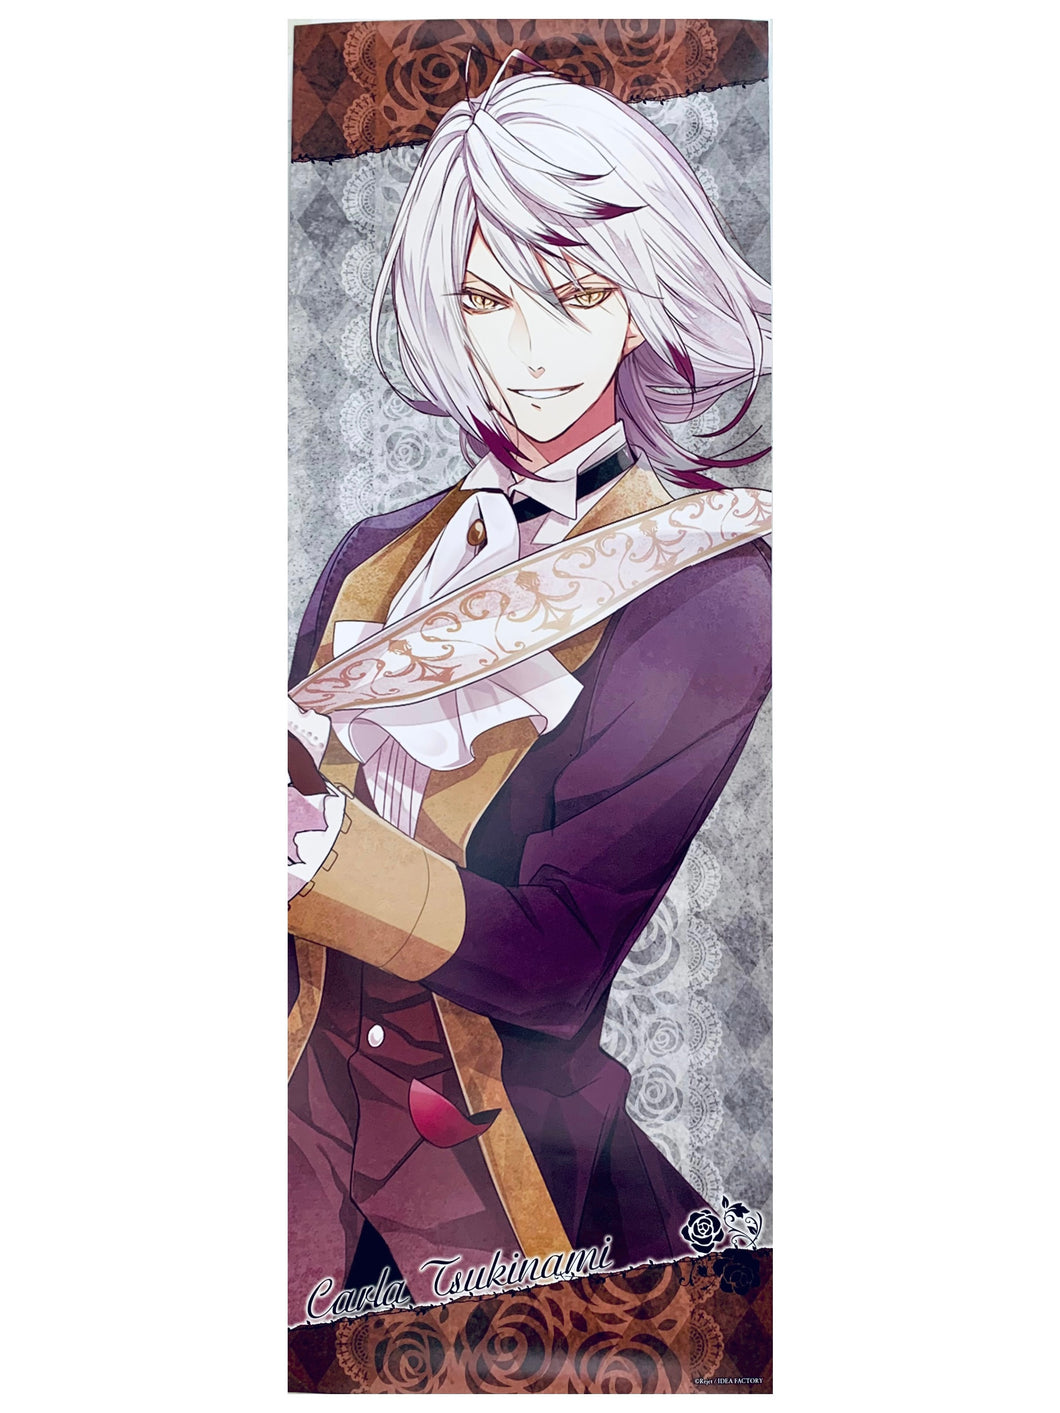 Diabolik Lovers Bloody Bouquet - Tsukinami Carla - DiaLover 'BLOODY BOUQUET' Poster Collection